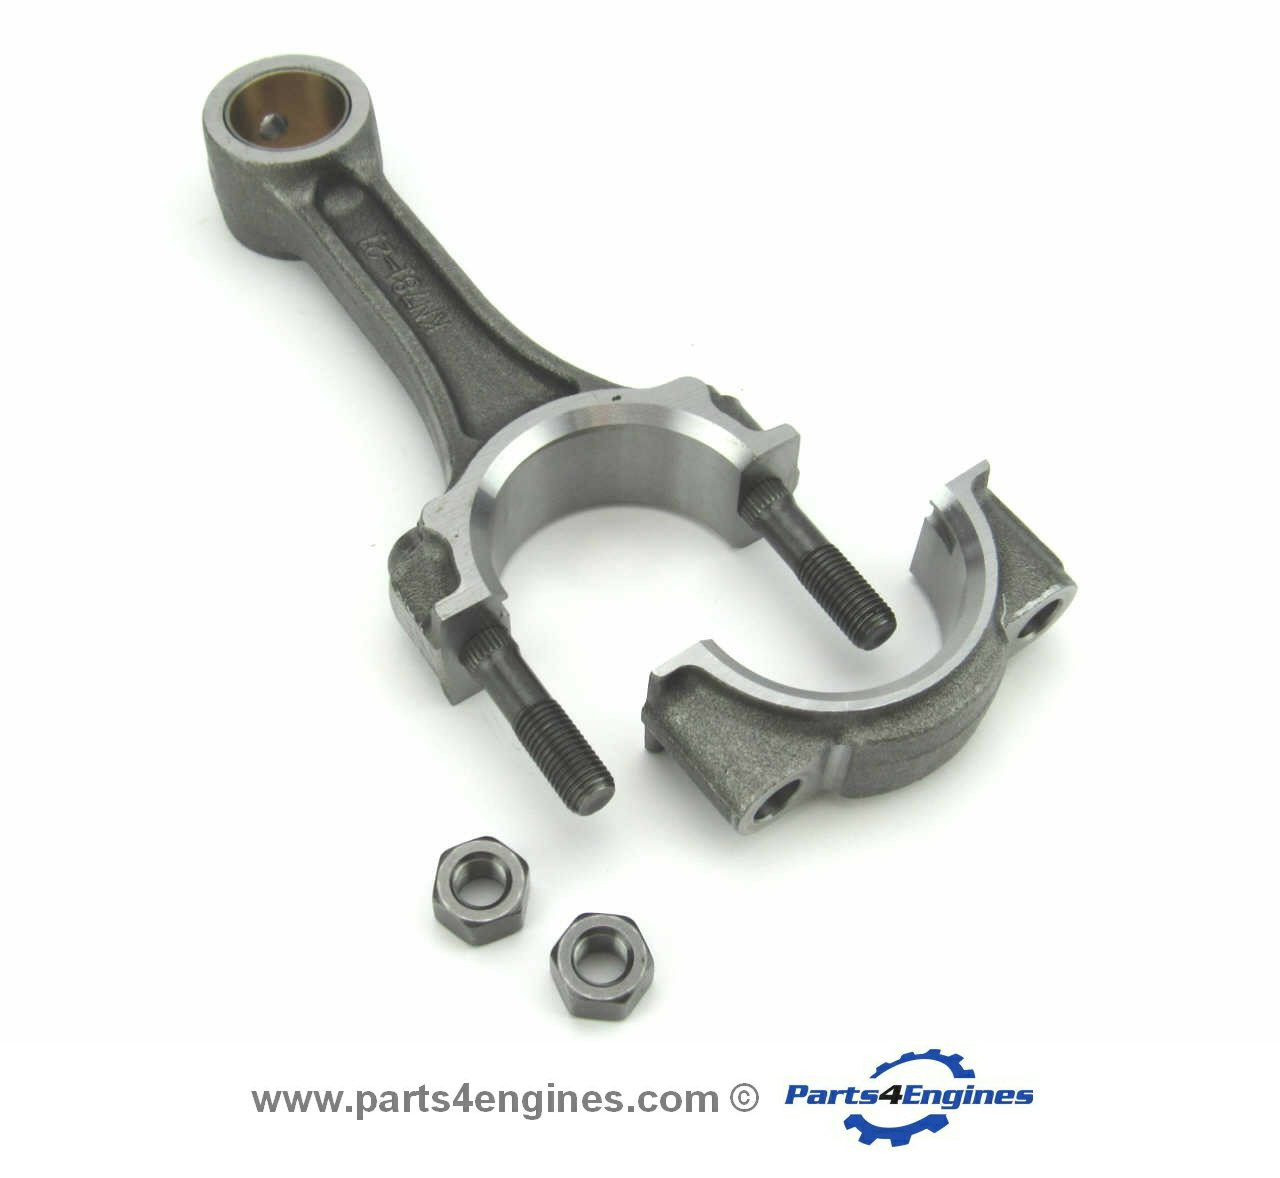 Perkins 400 series Connecting Rod from parts4engines.com